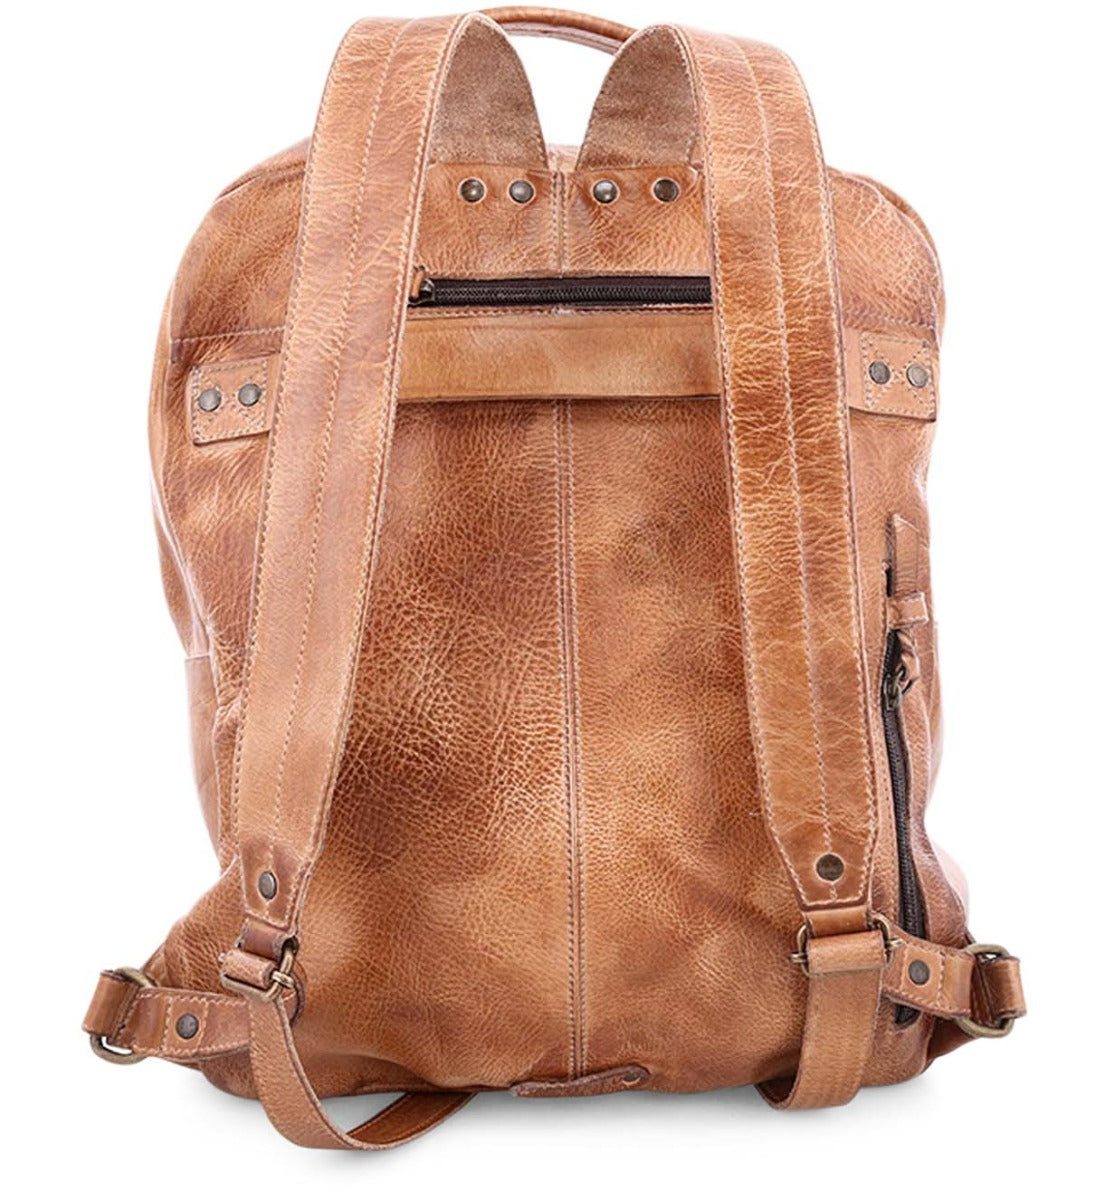 A Lafe by Bed Stu tan leather backpack with zippers and straps.